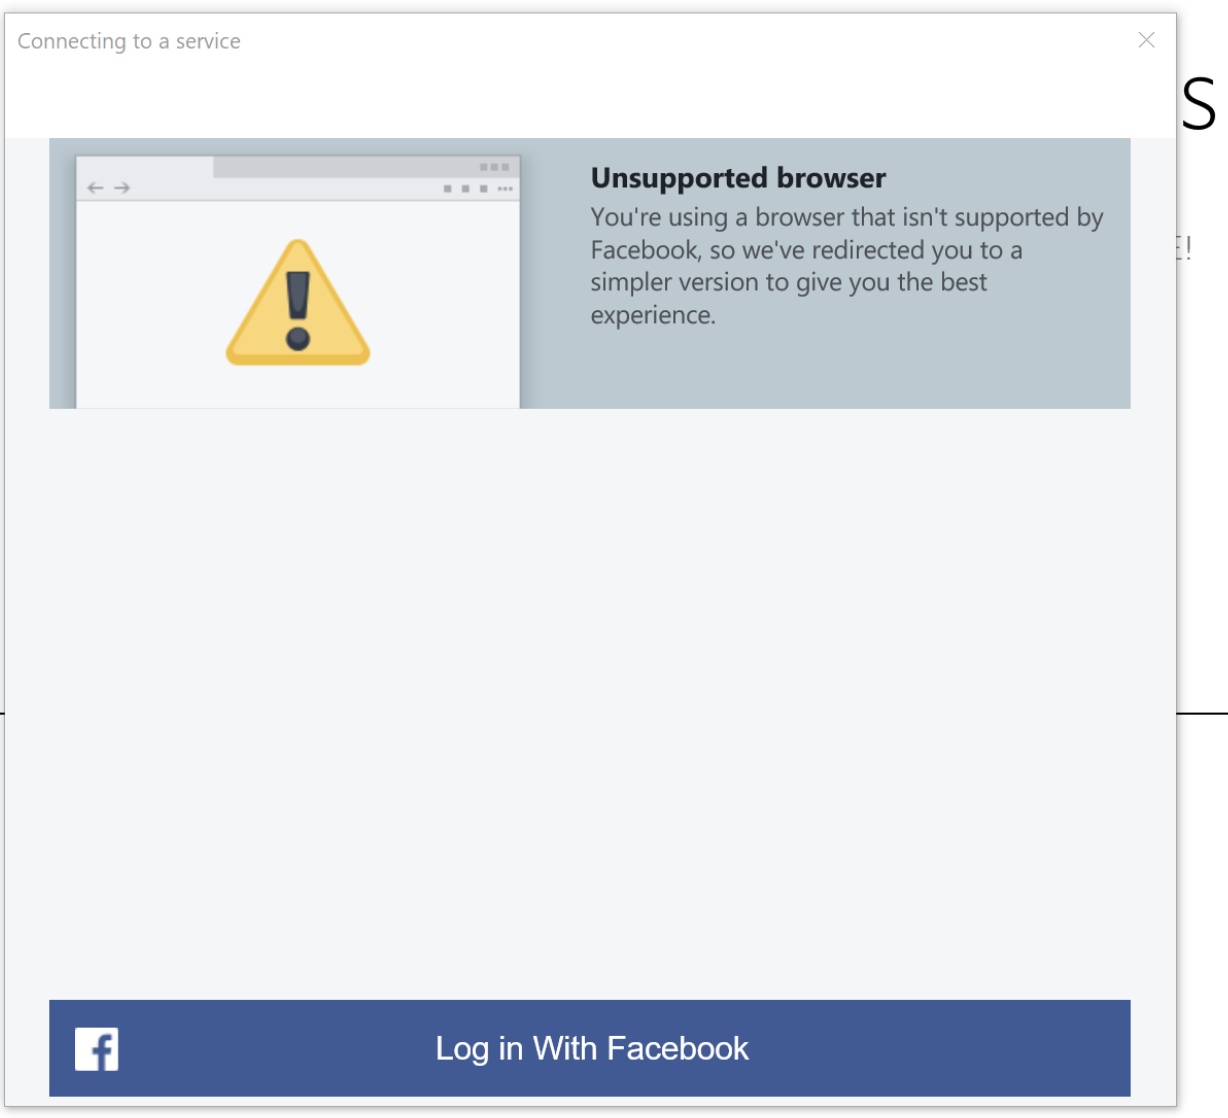 WebAuthenticationBroker is giving Unsupported Web Browser when using it for Fb  Login Workflow - Microsoft Q&A